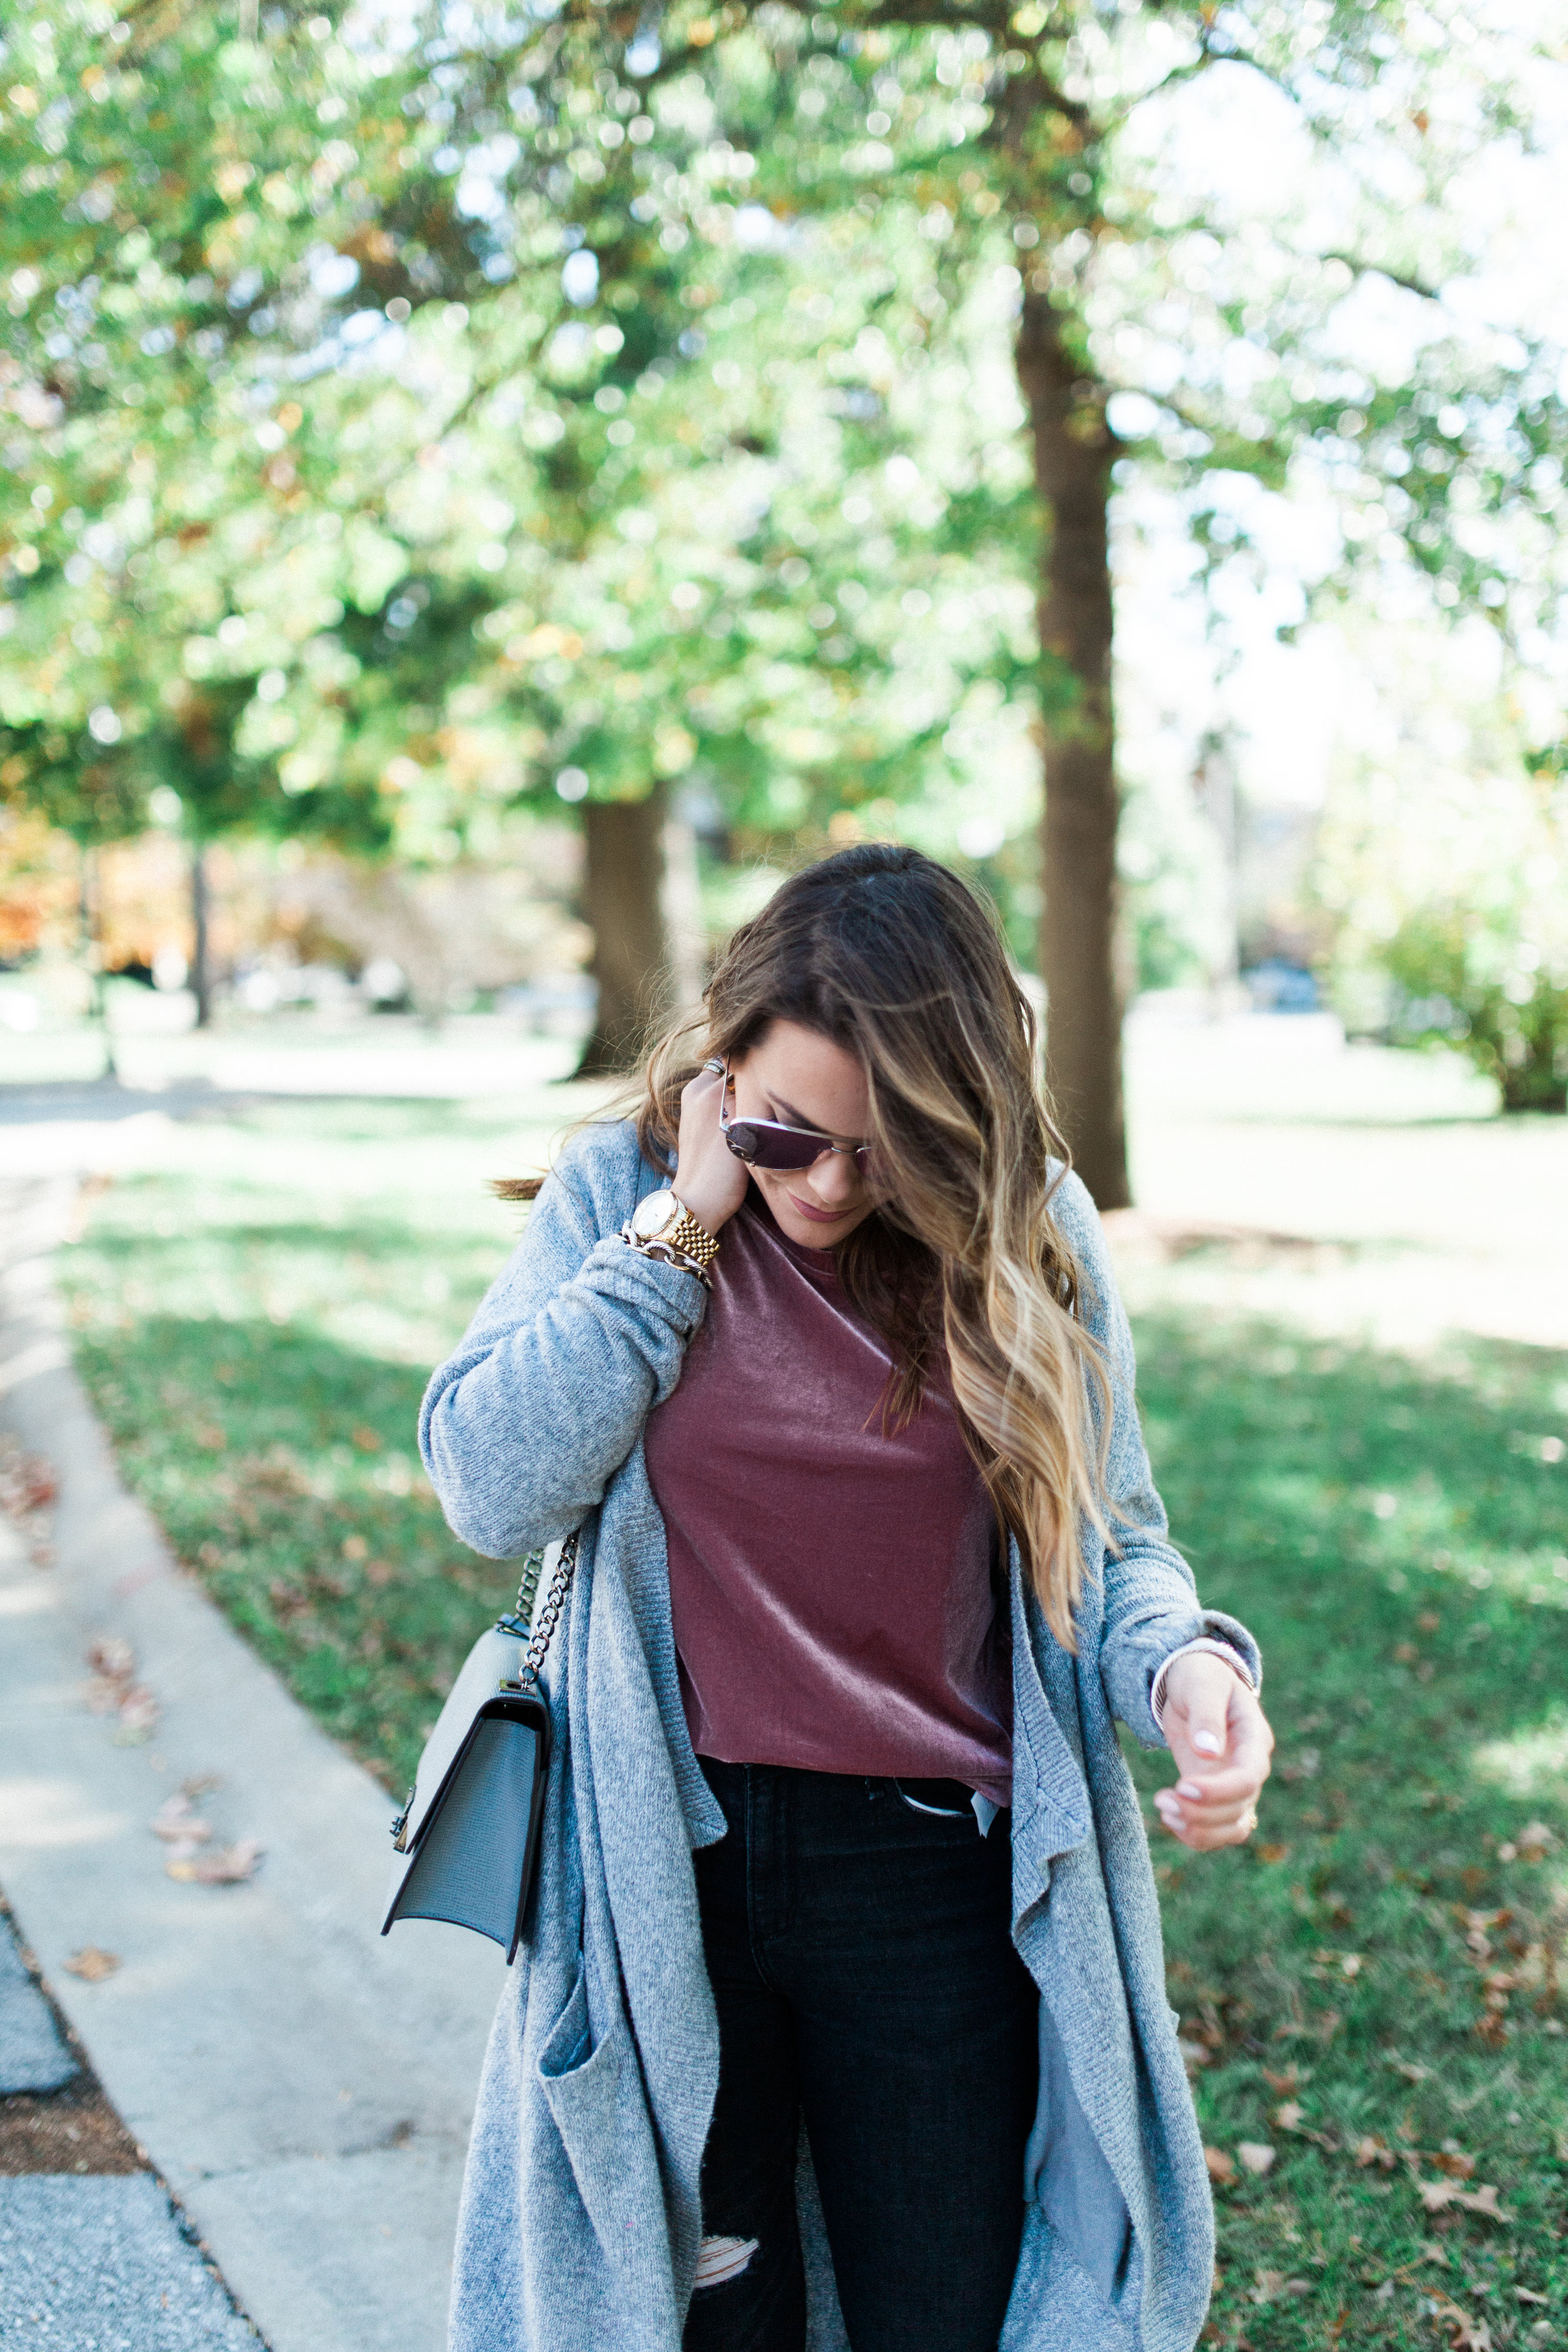 How to wear a velvet tee / fall outfit idea